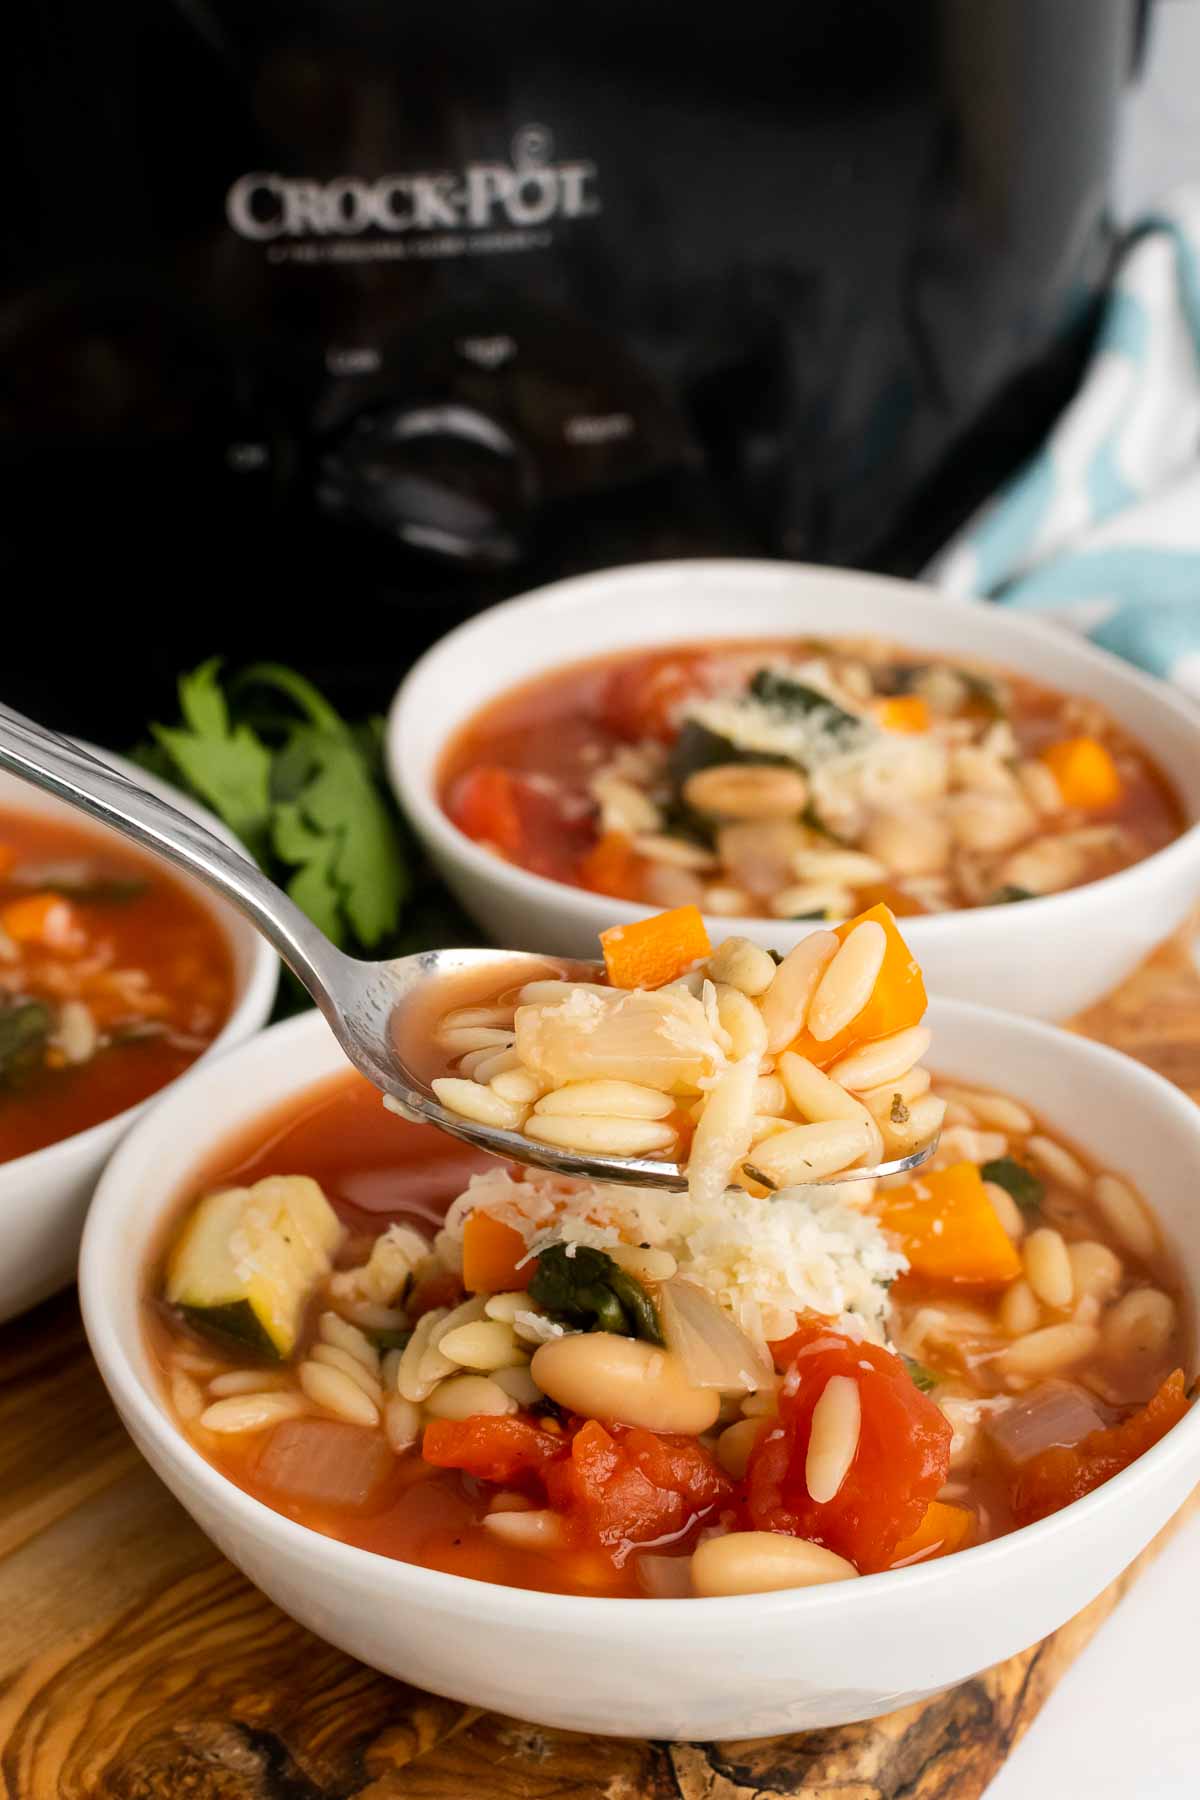 Spoon full of Slow Cooker Minestrone held over a bowl